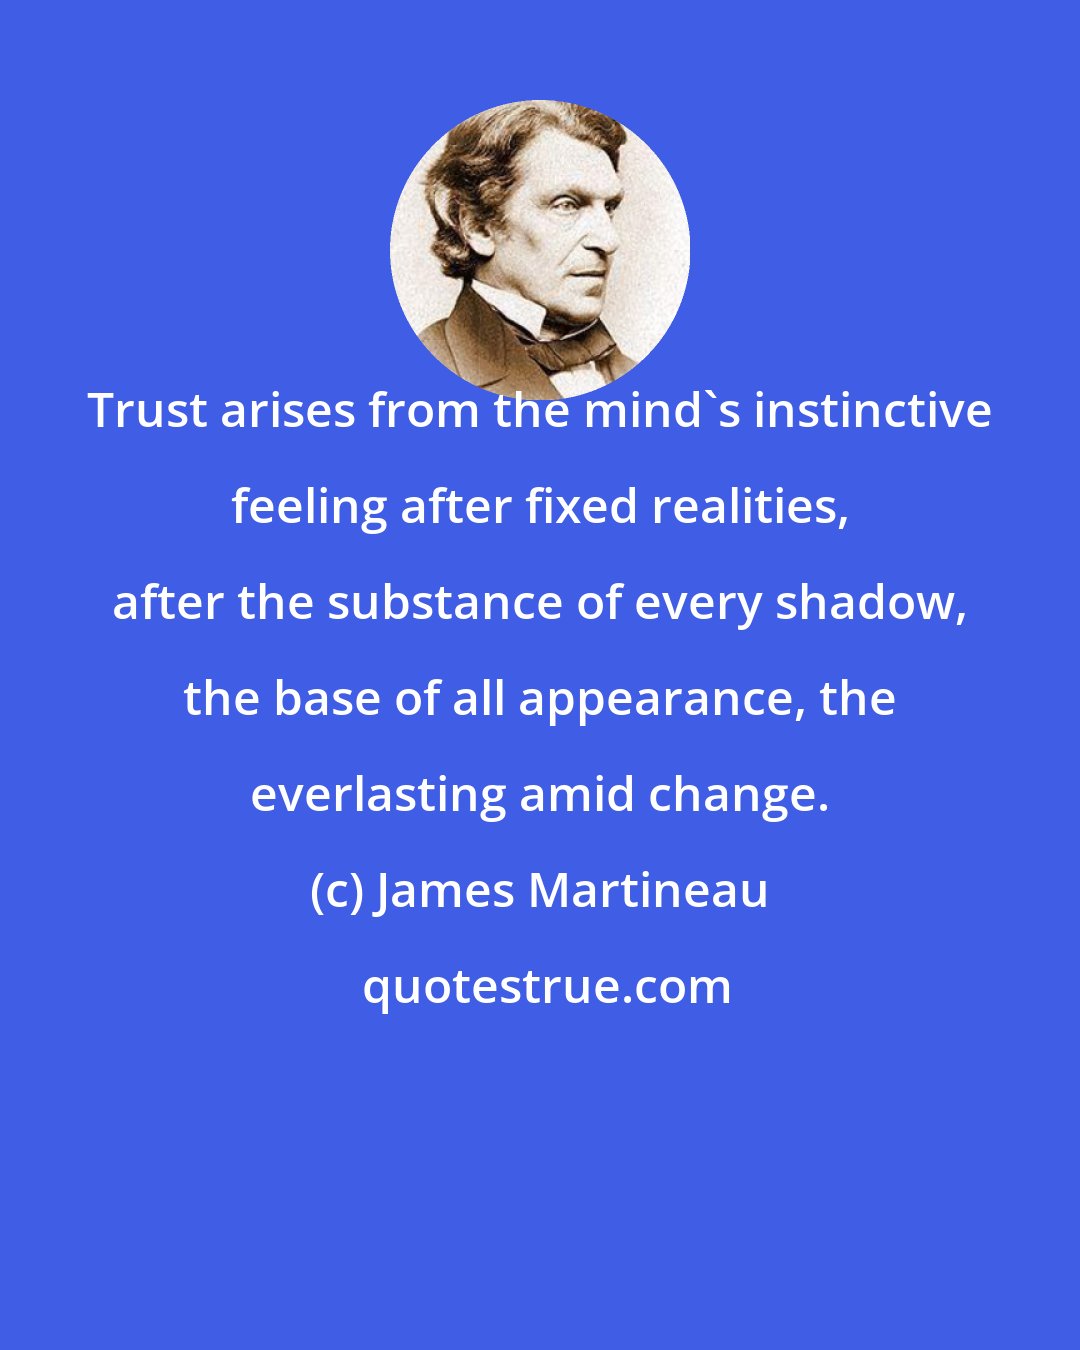 James Martineau: Trust arises from the mind's instinctive feeling after fixed realities, after the substance of every shadow, the base of all appearance, the everlasting amid change.